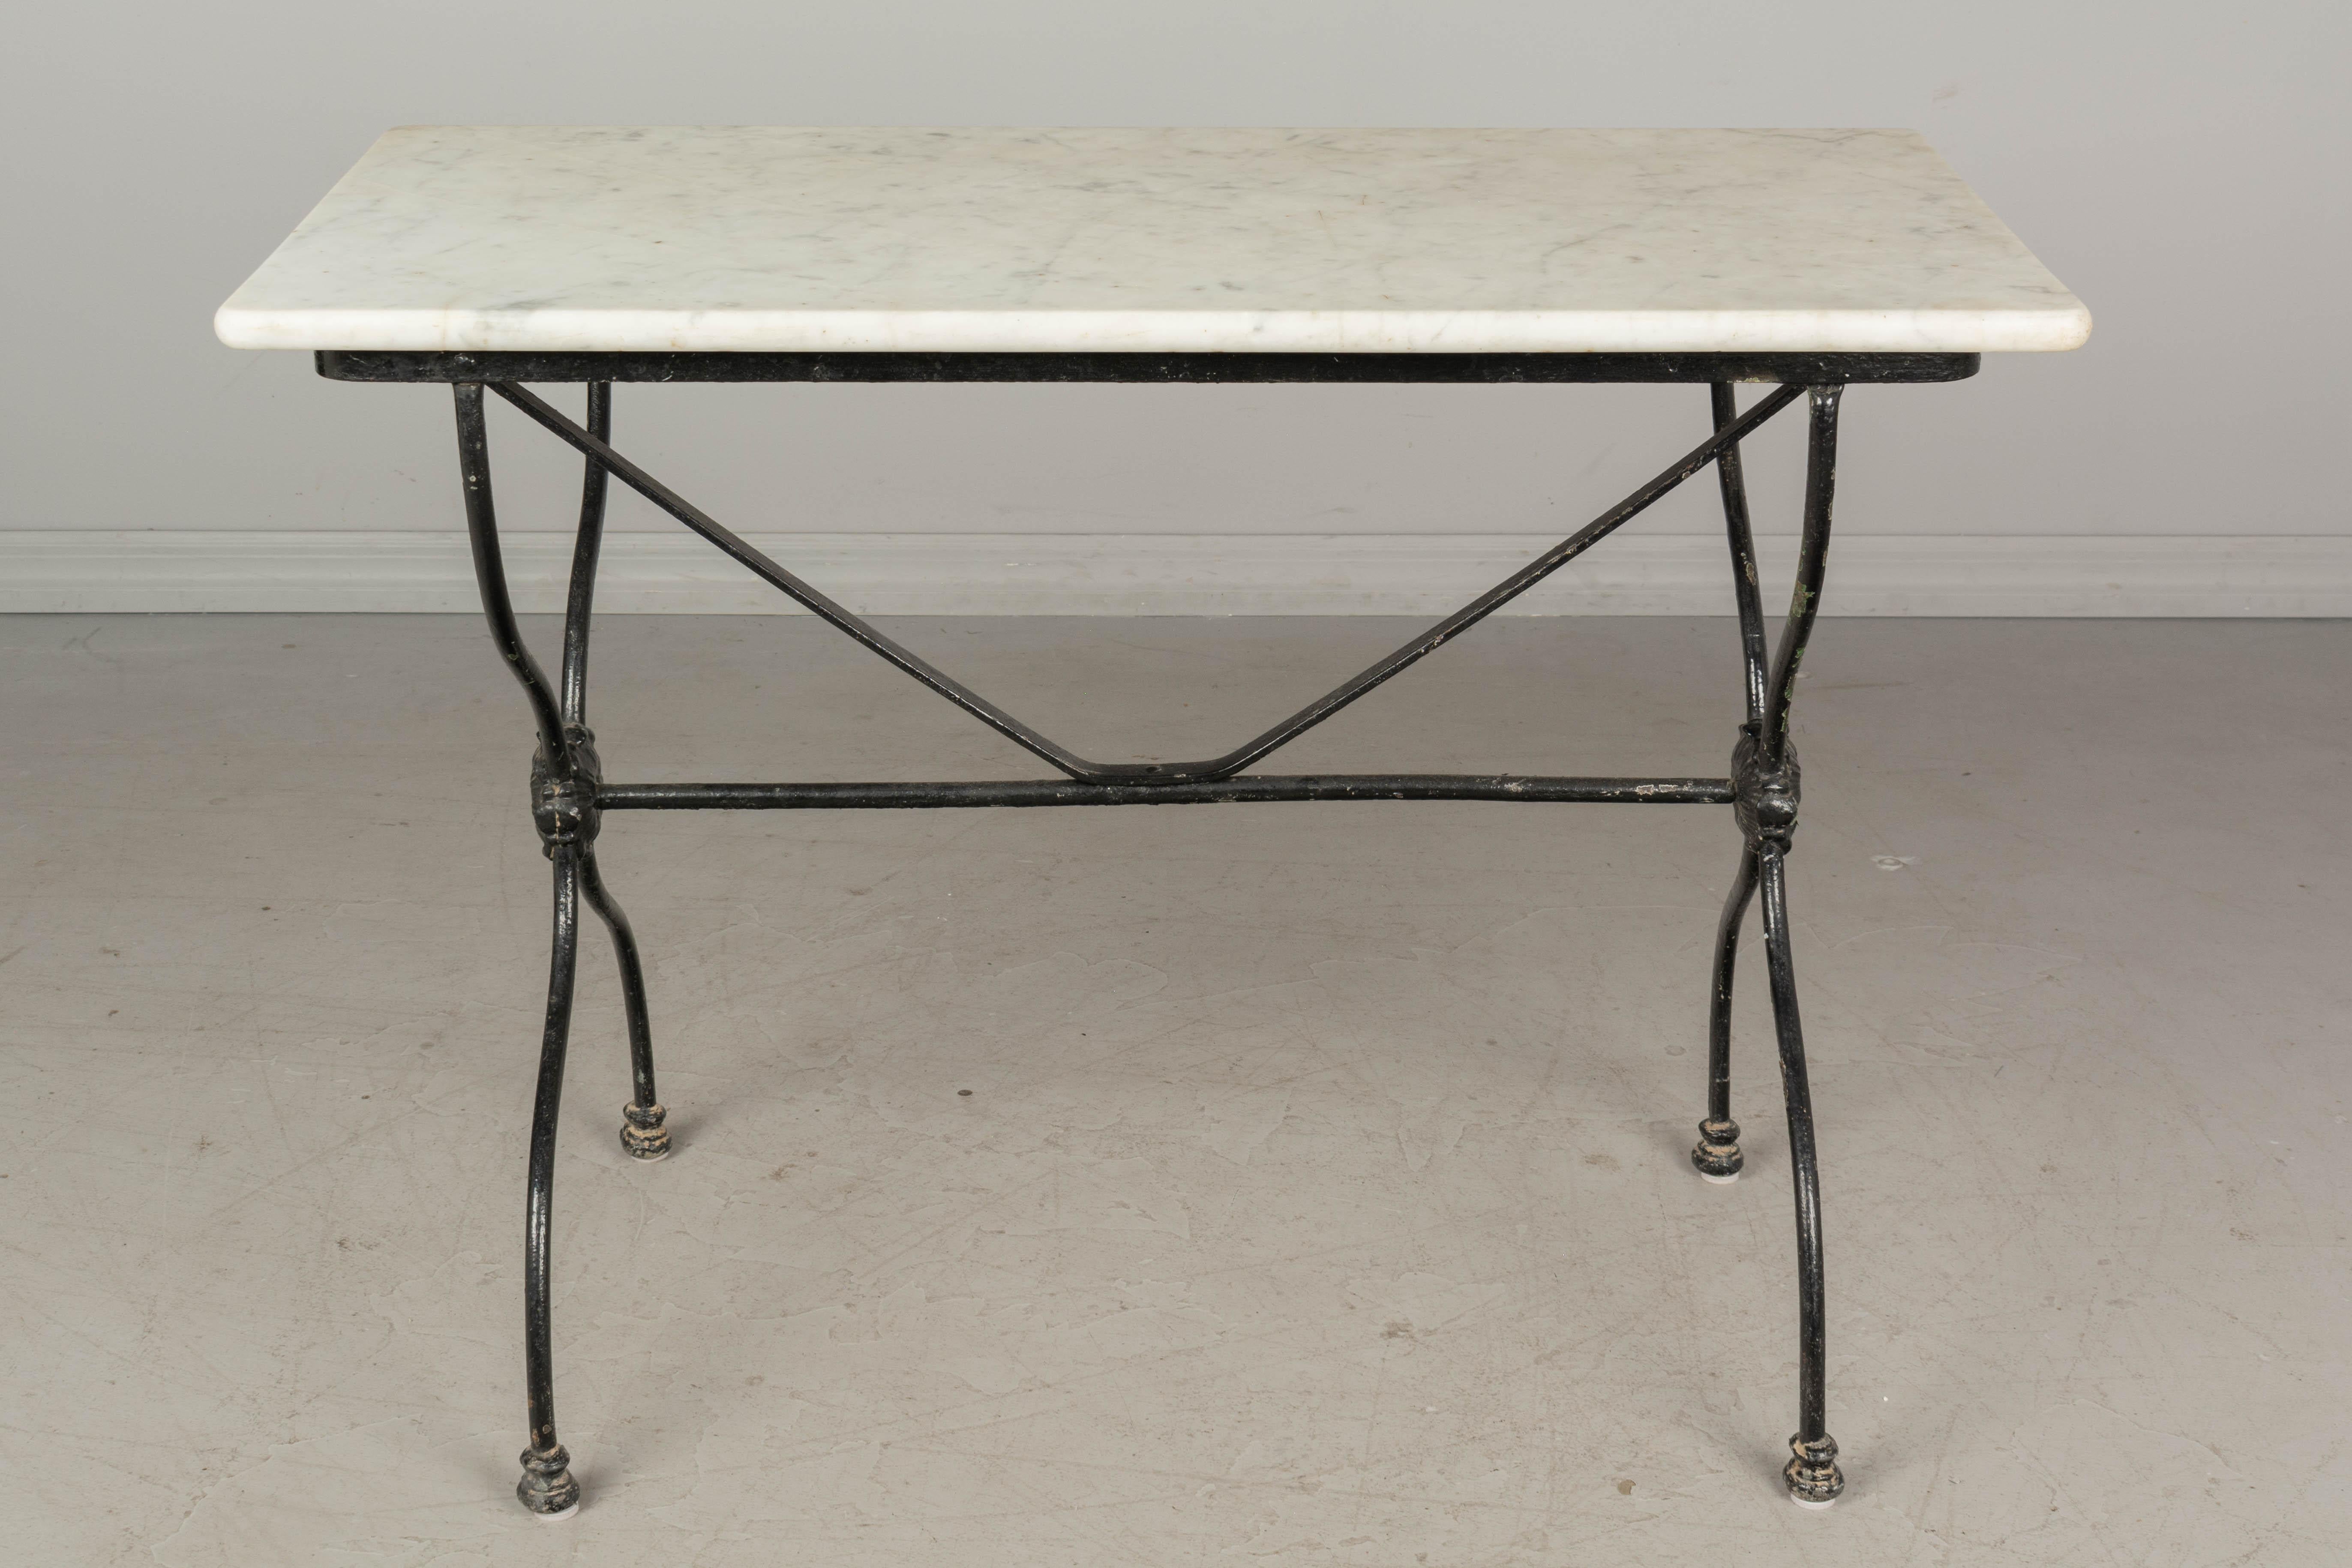 A 19th century French cast iron bistro table with black painted finish and original white veined marble top. Nice casting with rosette medallion detail. Minor paint loss. Please refer to photos for more details. Pictures are part of the